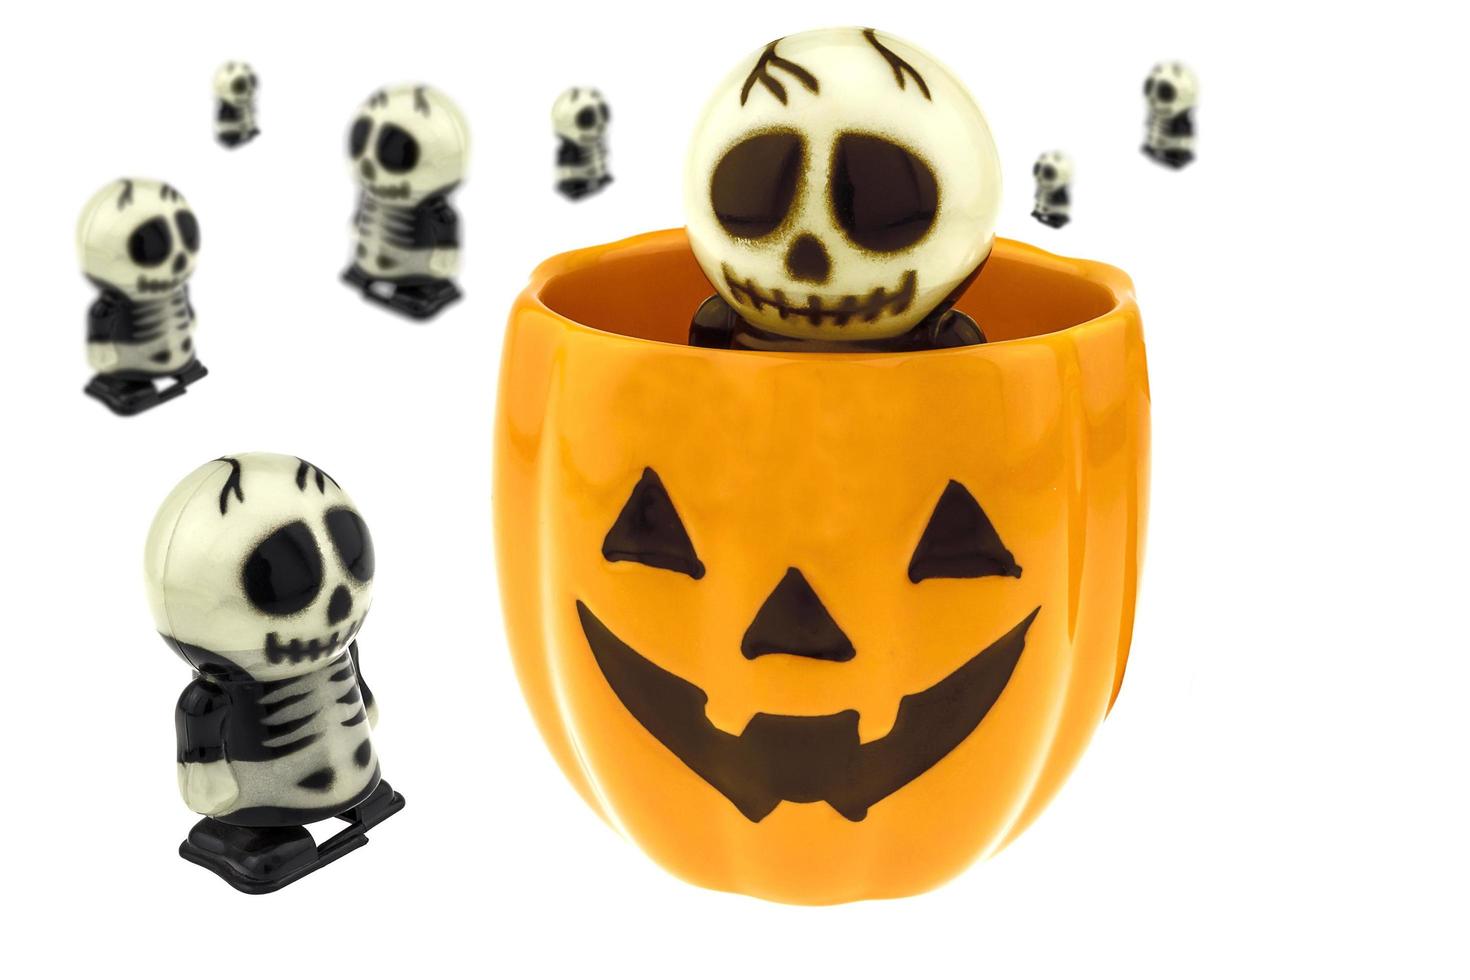 Skeleton toy and Jack-o-Lantern mug cup for Halloween decoration isolated over white photo